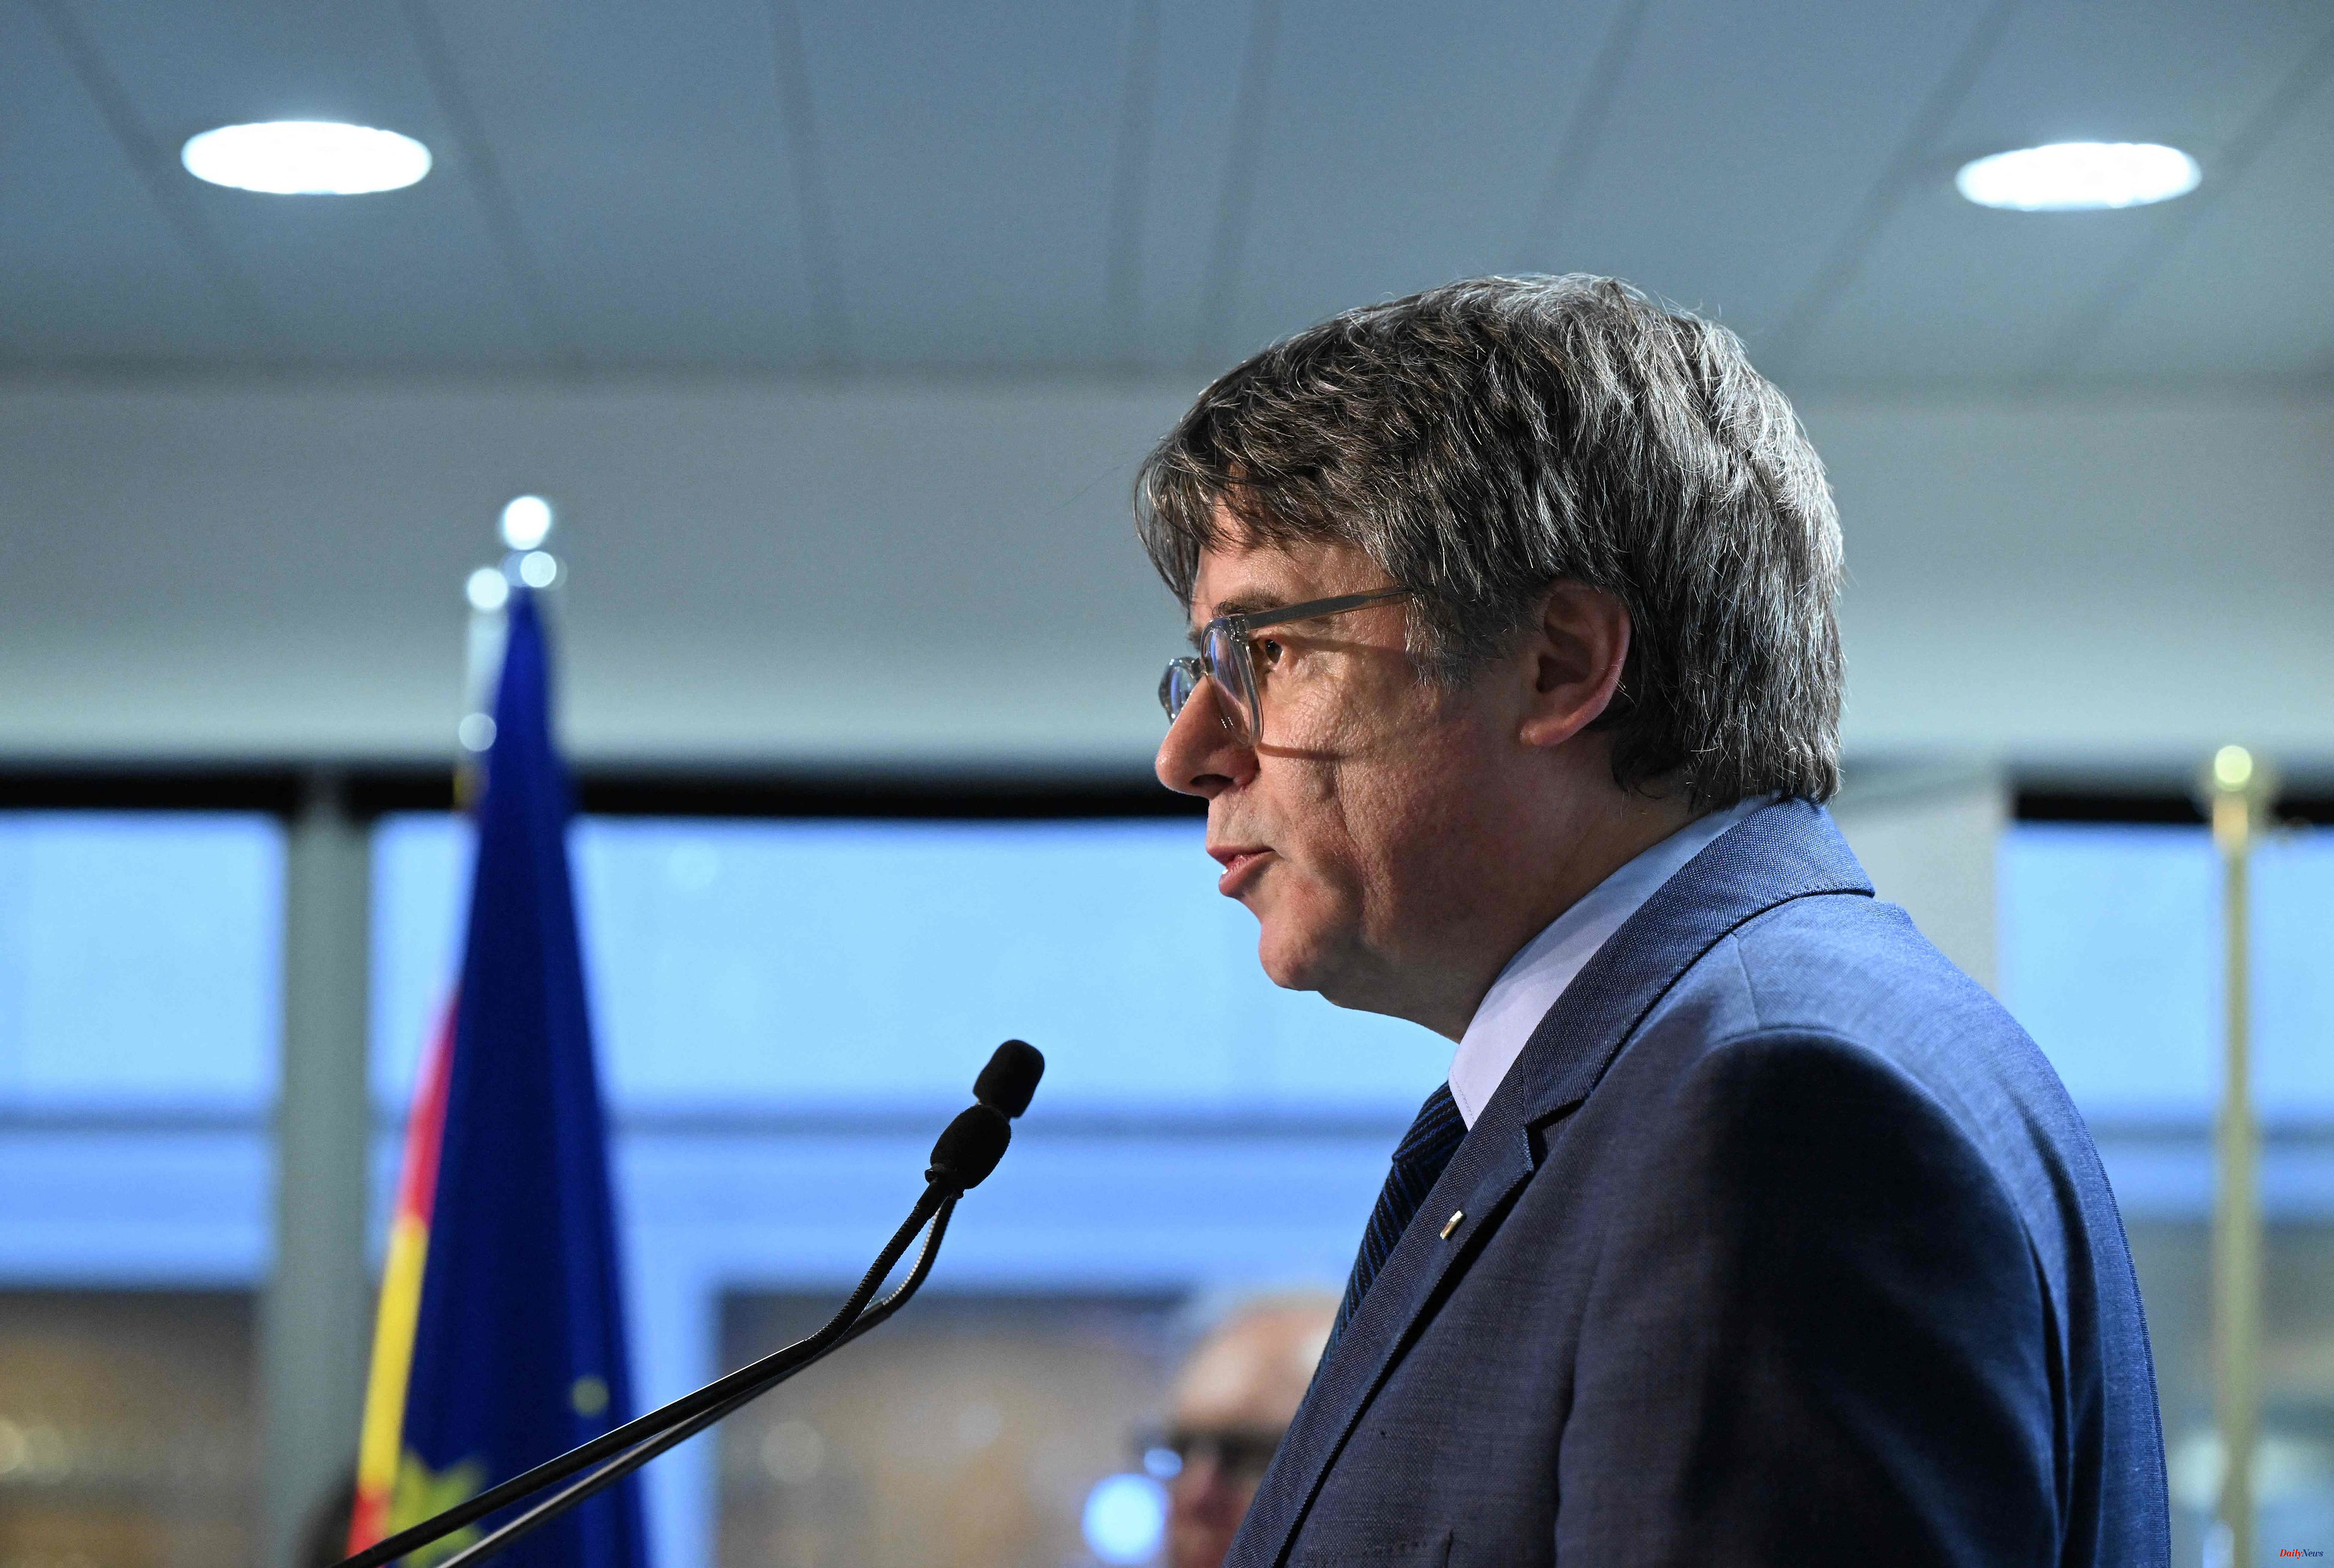 Justice The Court of Accounts rejects Puigdemont's request to suspend his trial for embezzlement